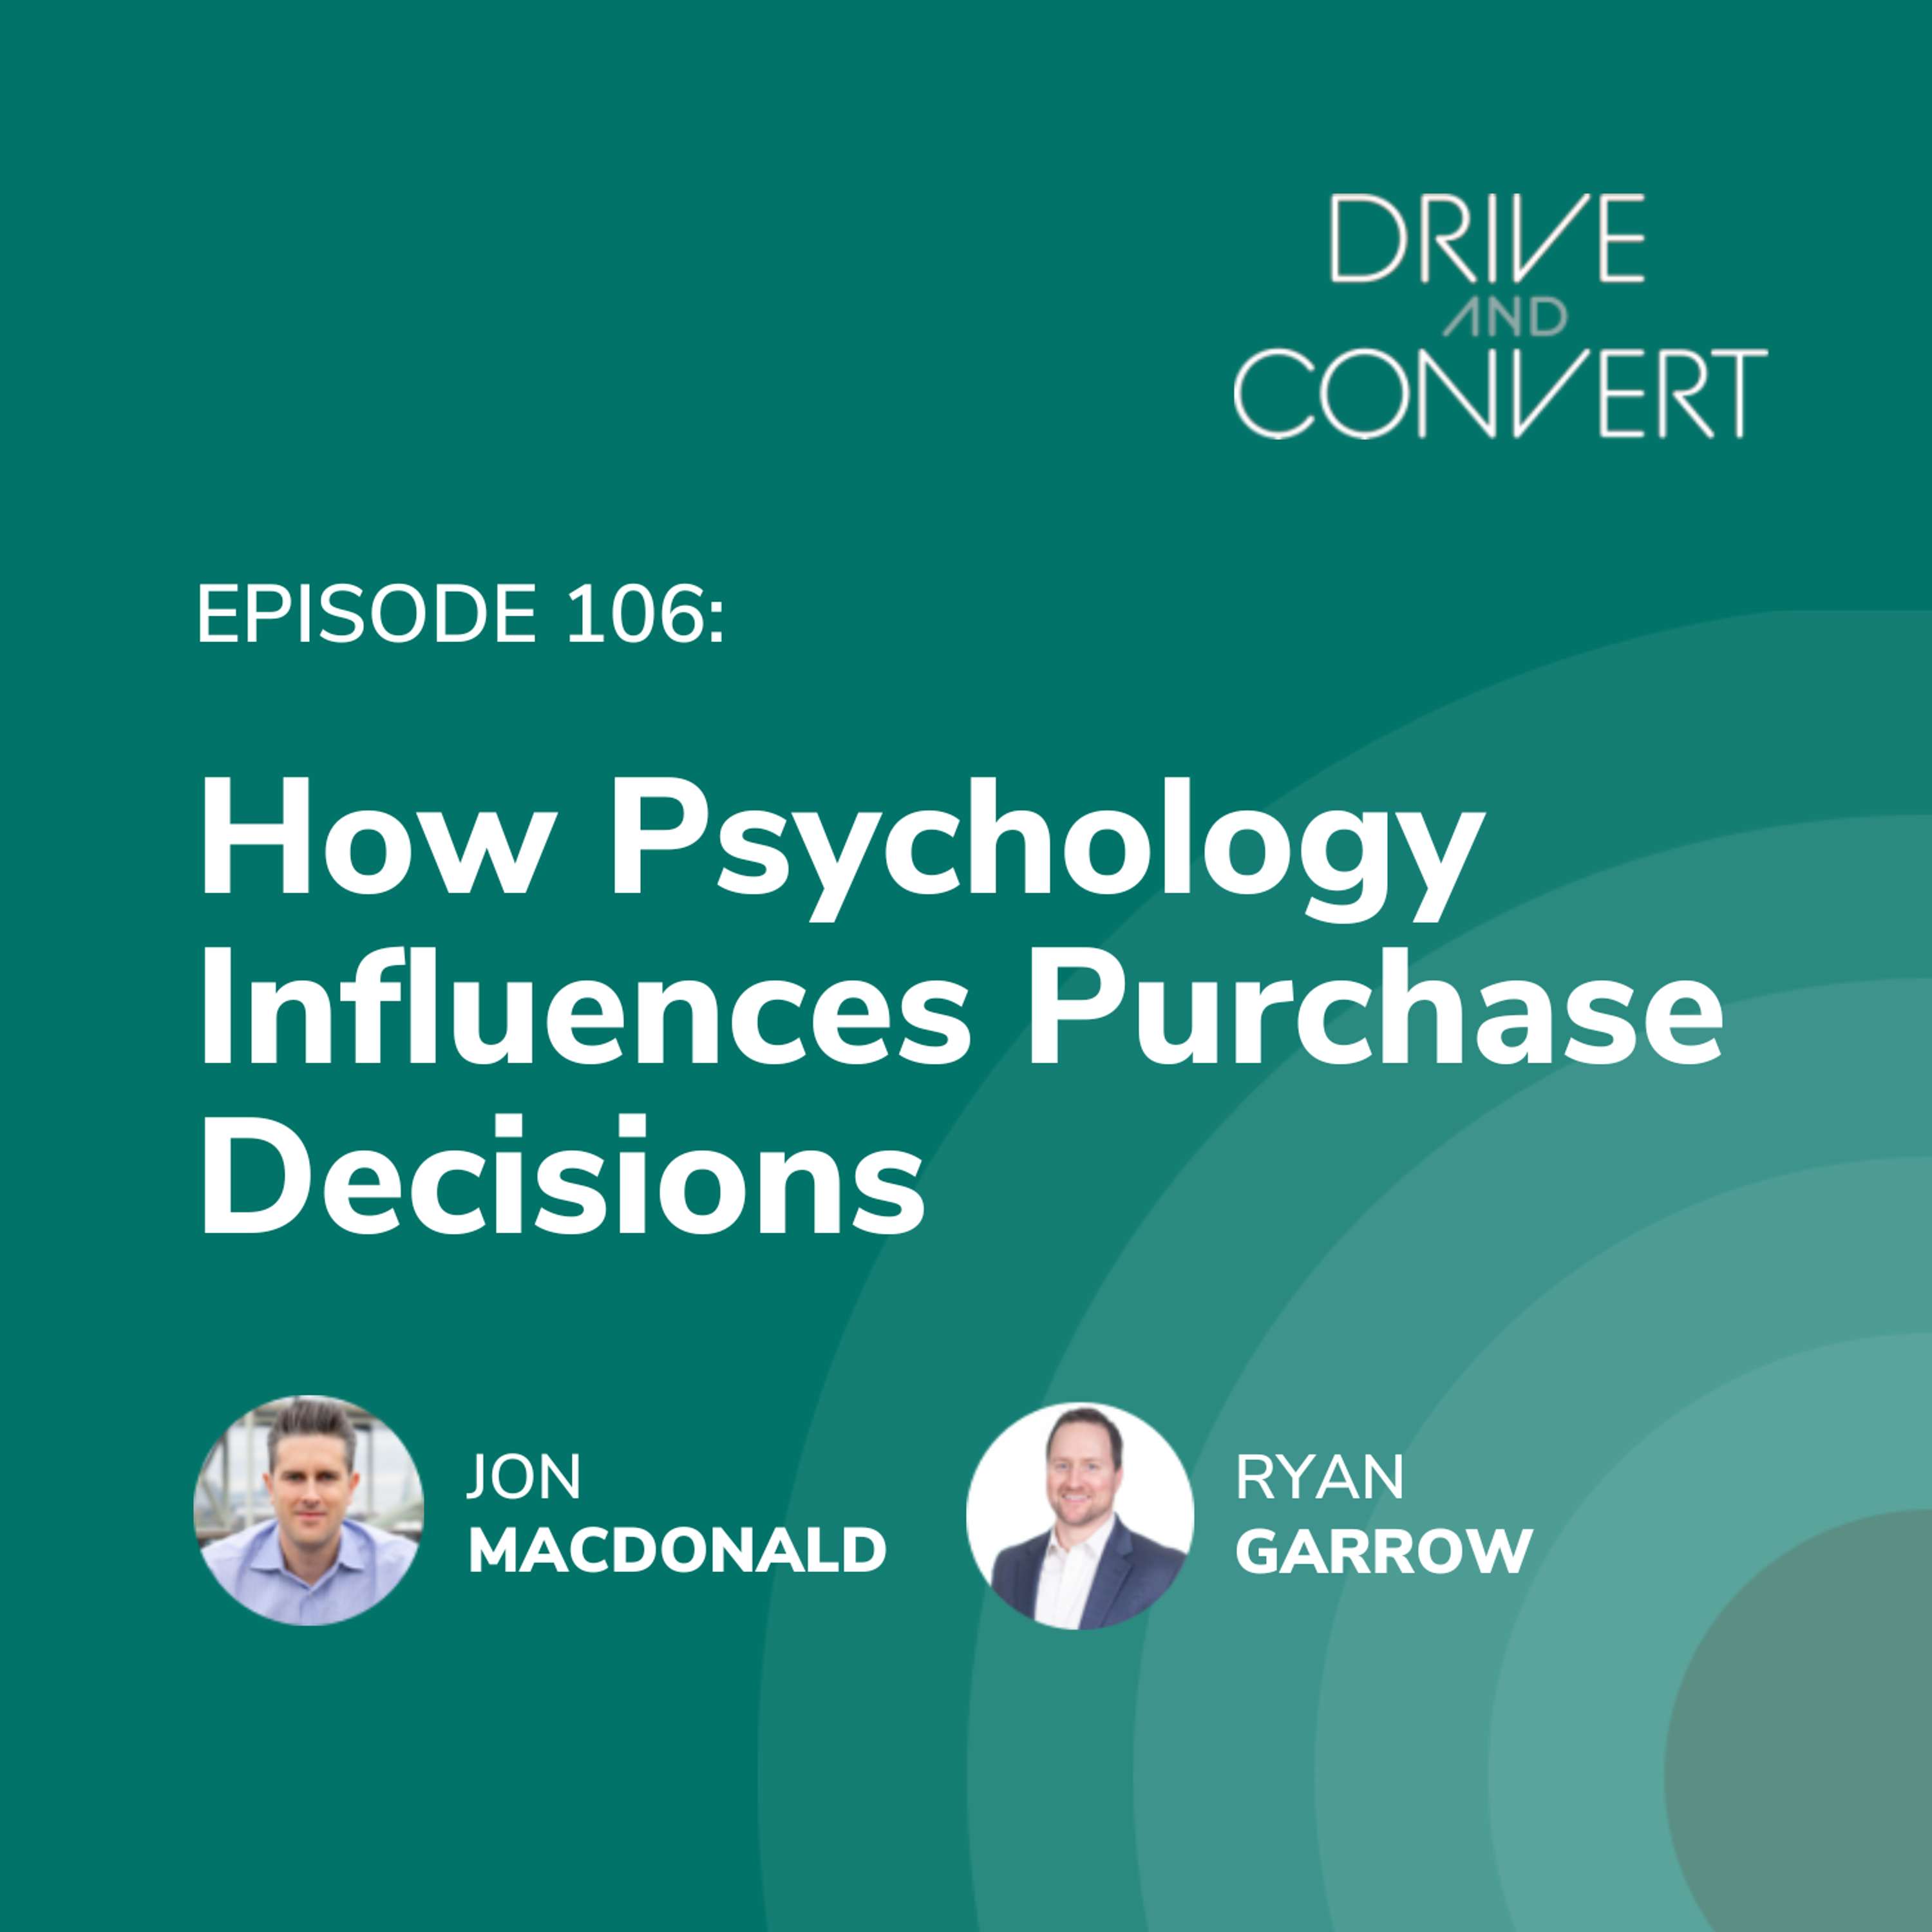 How Psychology Influences Purchase Decisions